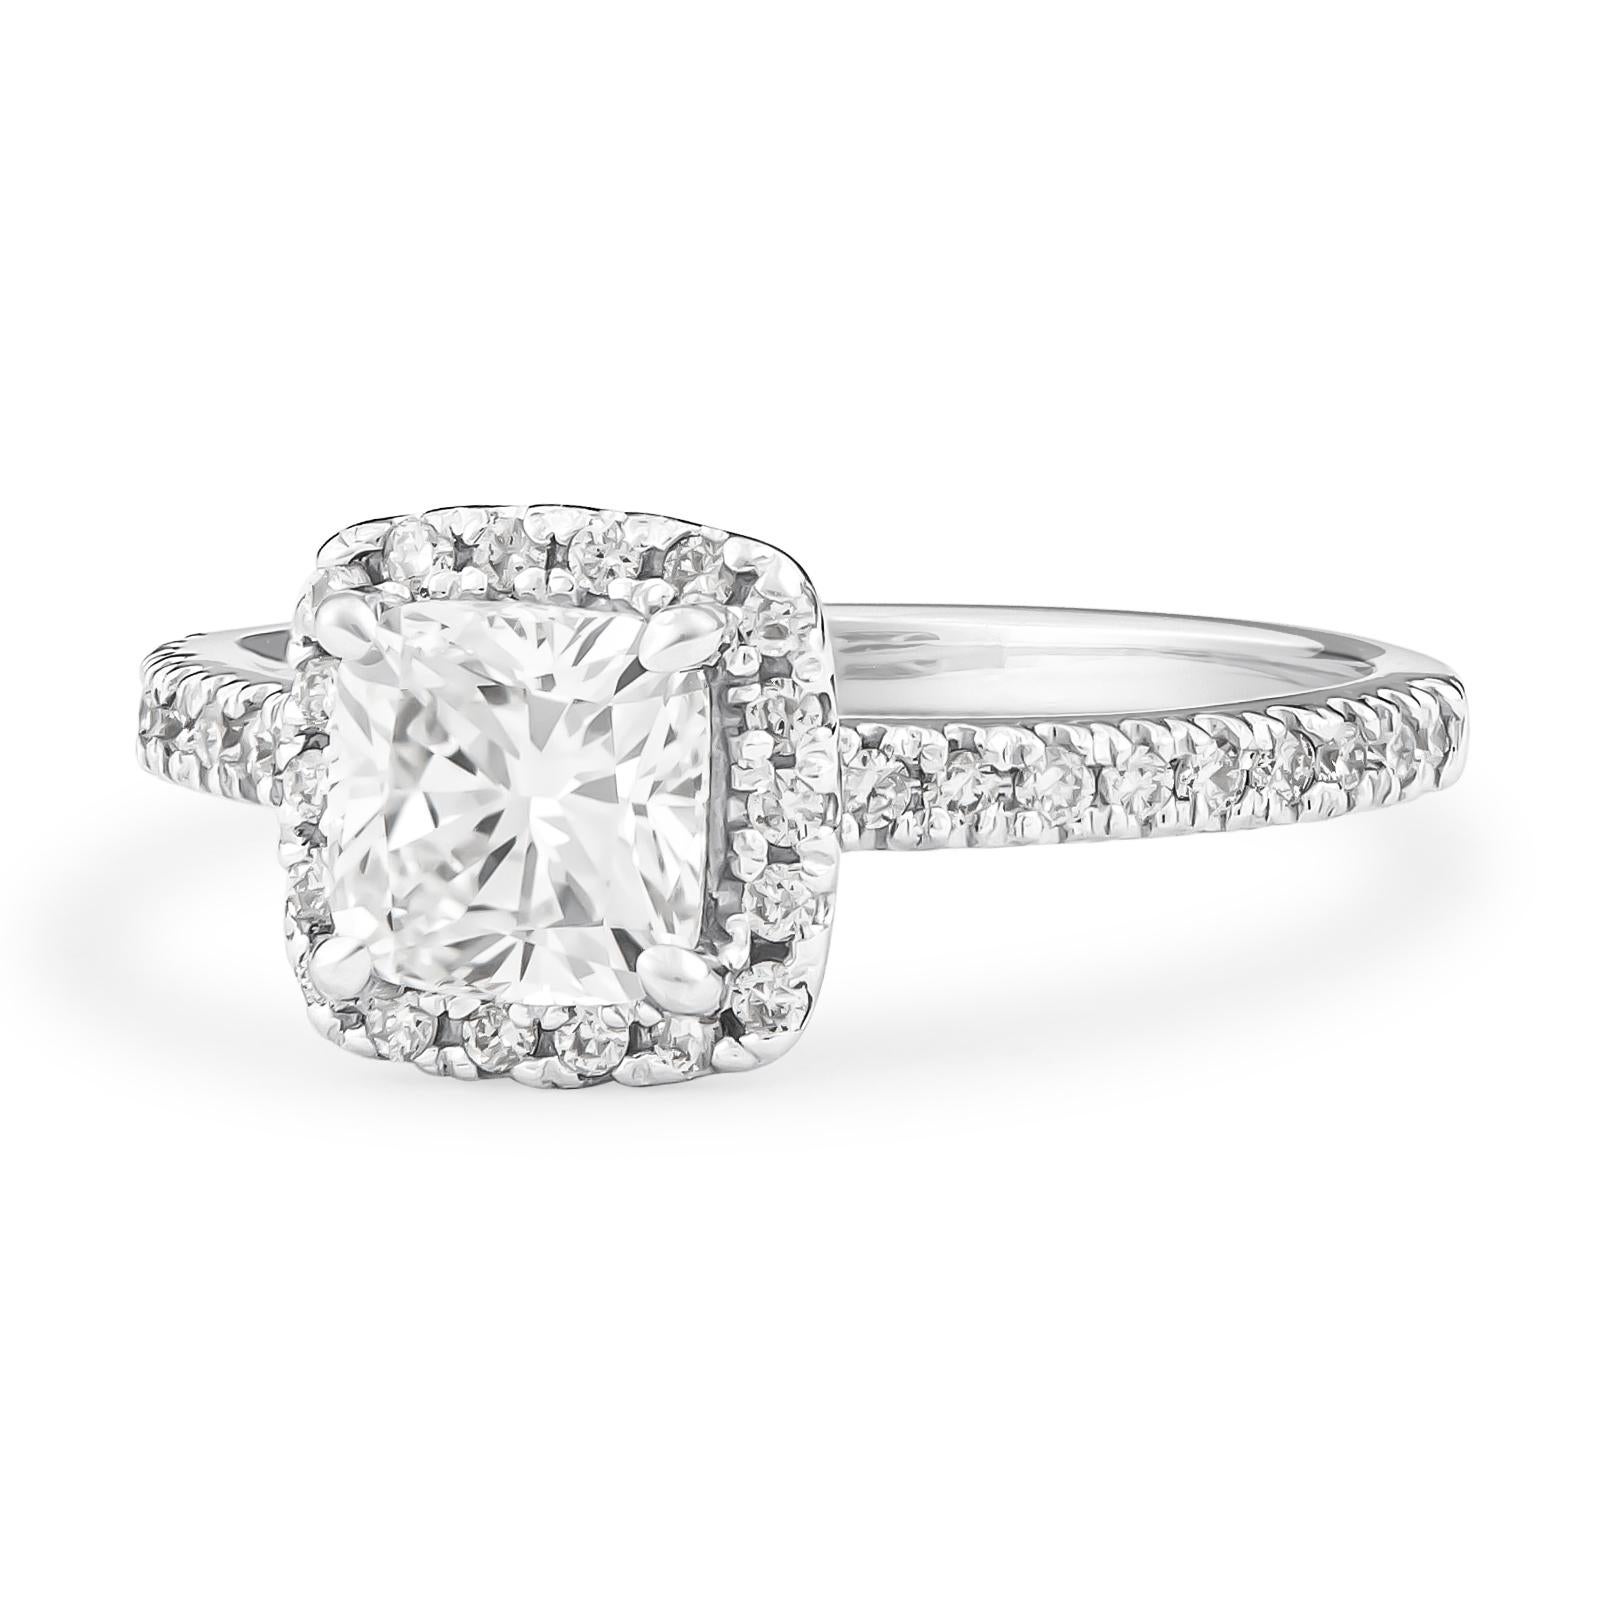 Dazzling 1.01 carat cushion cut center diamond with 0.40 carats total of round brilliant cut diamonds perfectly set in halo form. This engagement ring has been expertly crafted here in our store in platinum setting and is also accompanied by its own